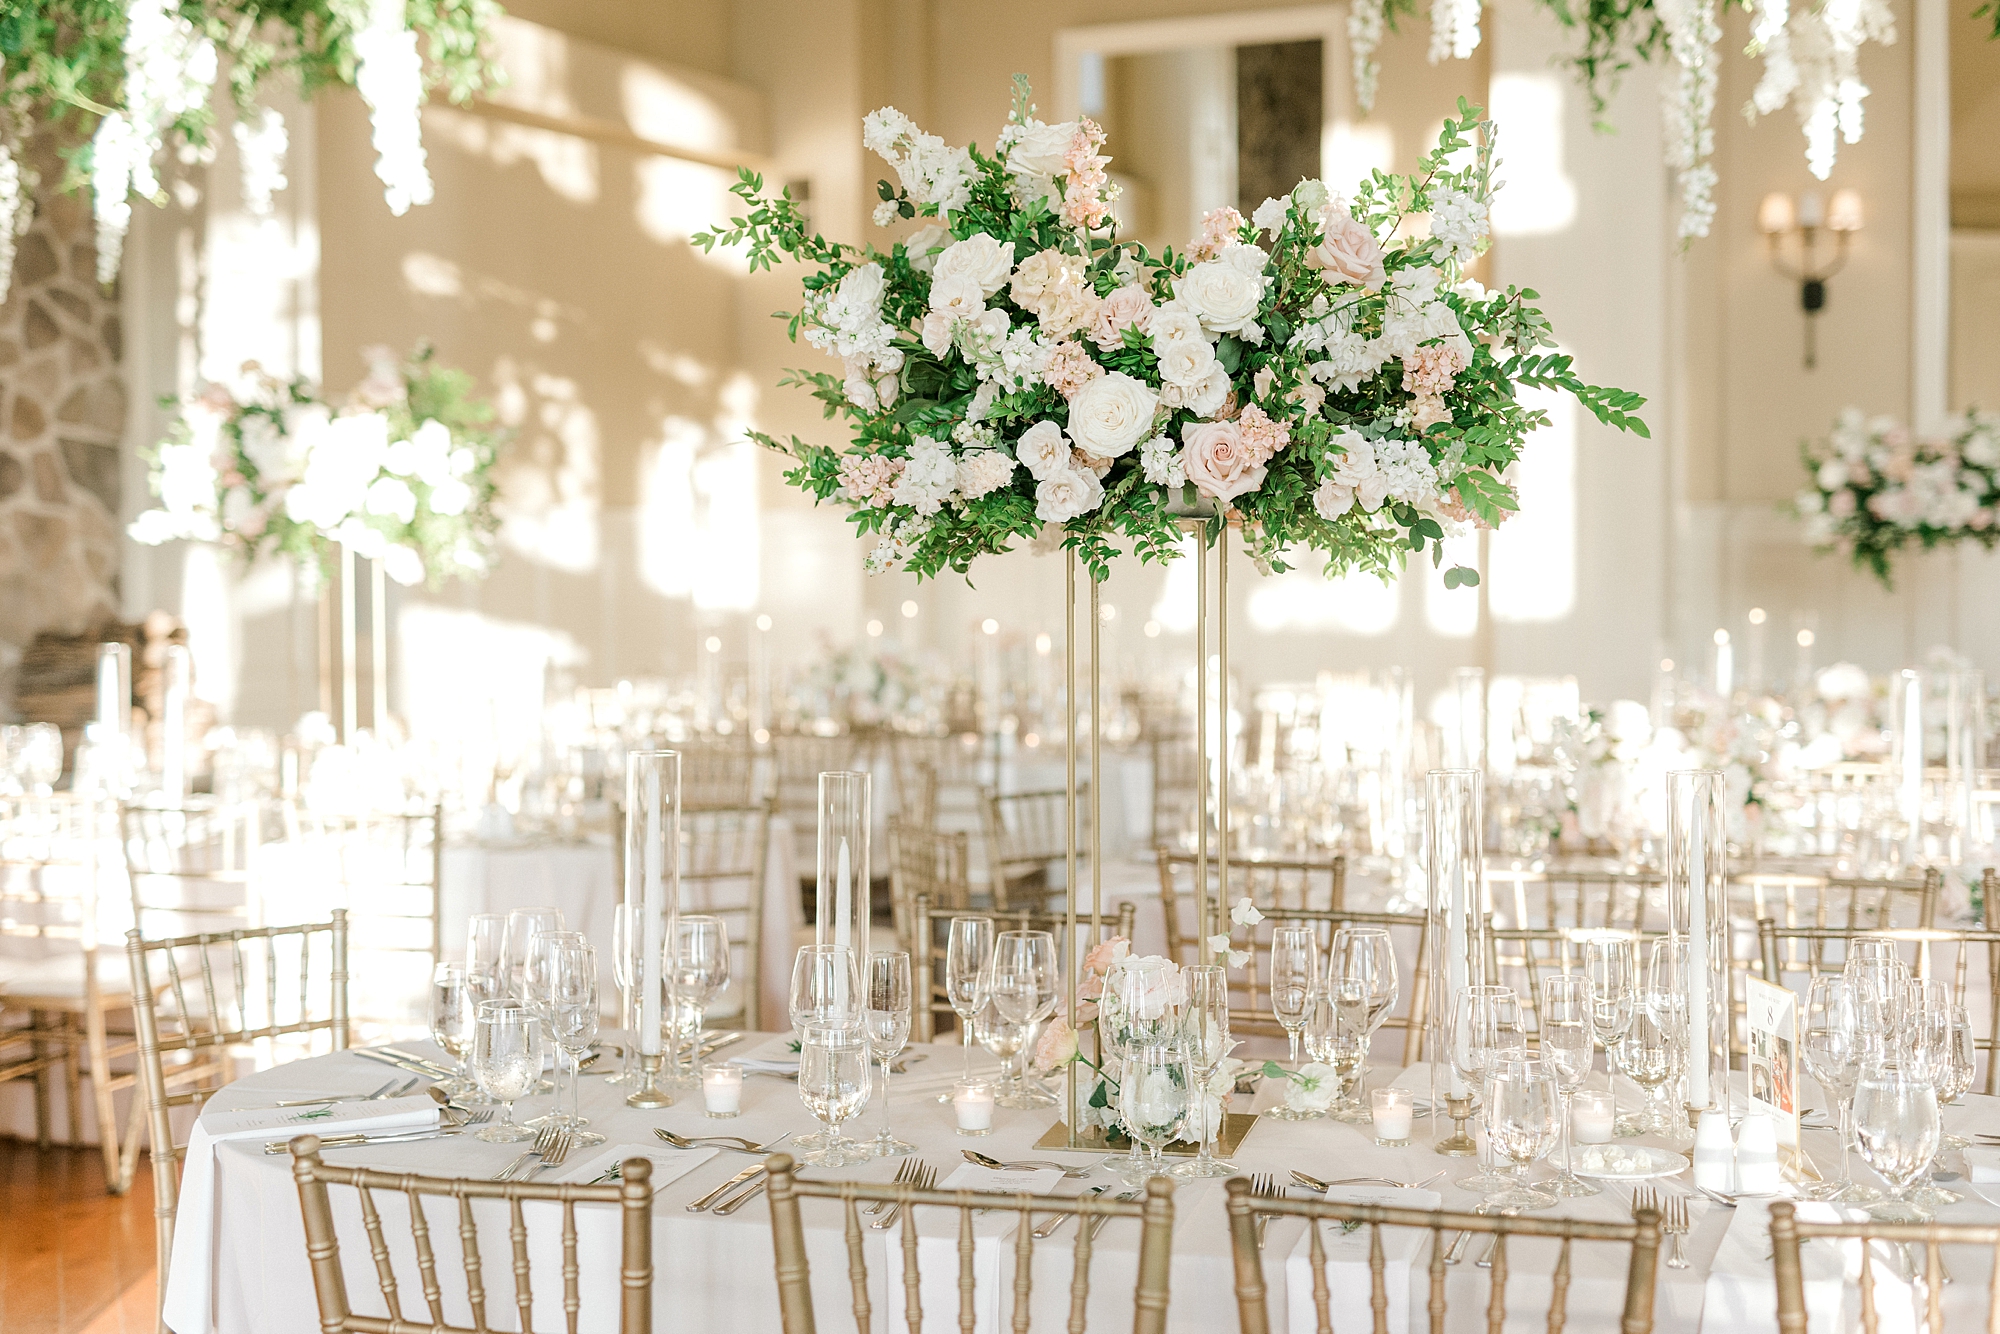 wedding reception with luxurious centerpieces of white and pink flowers